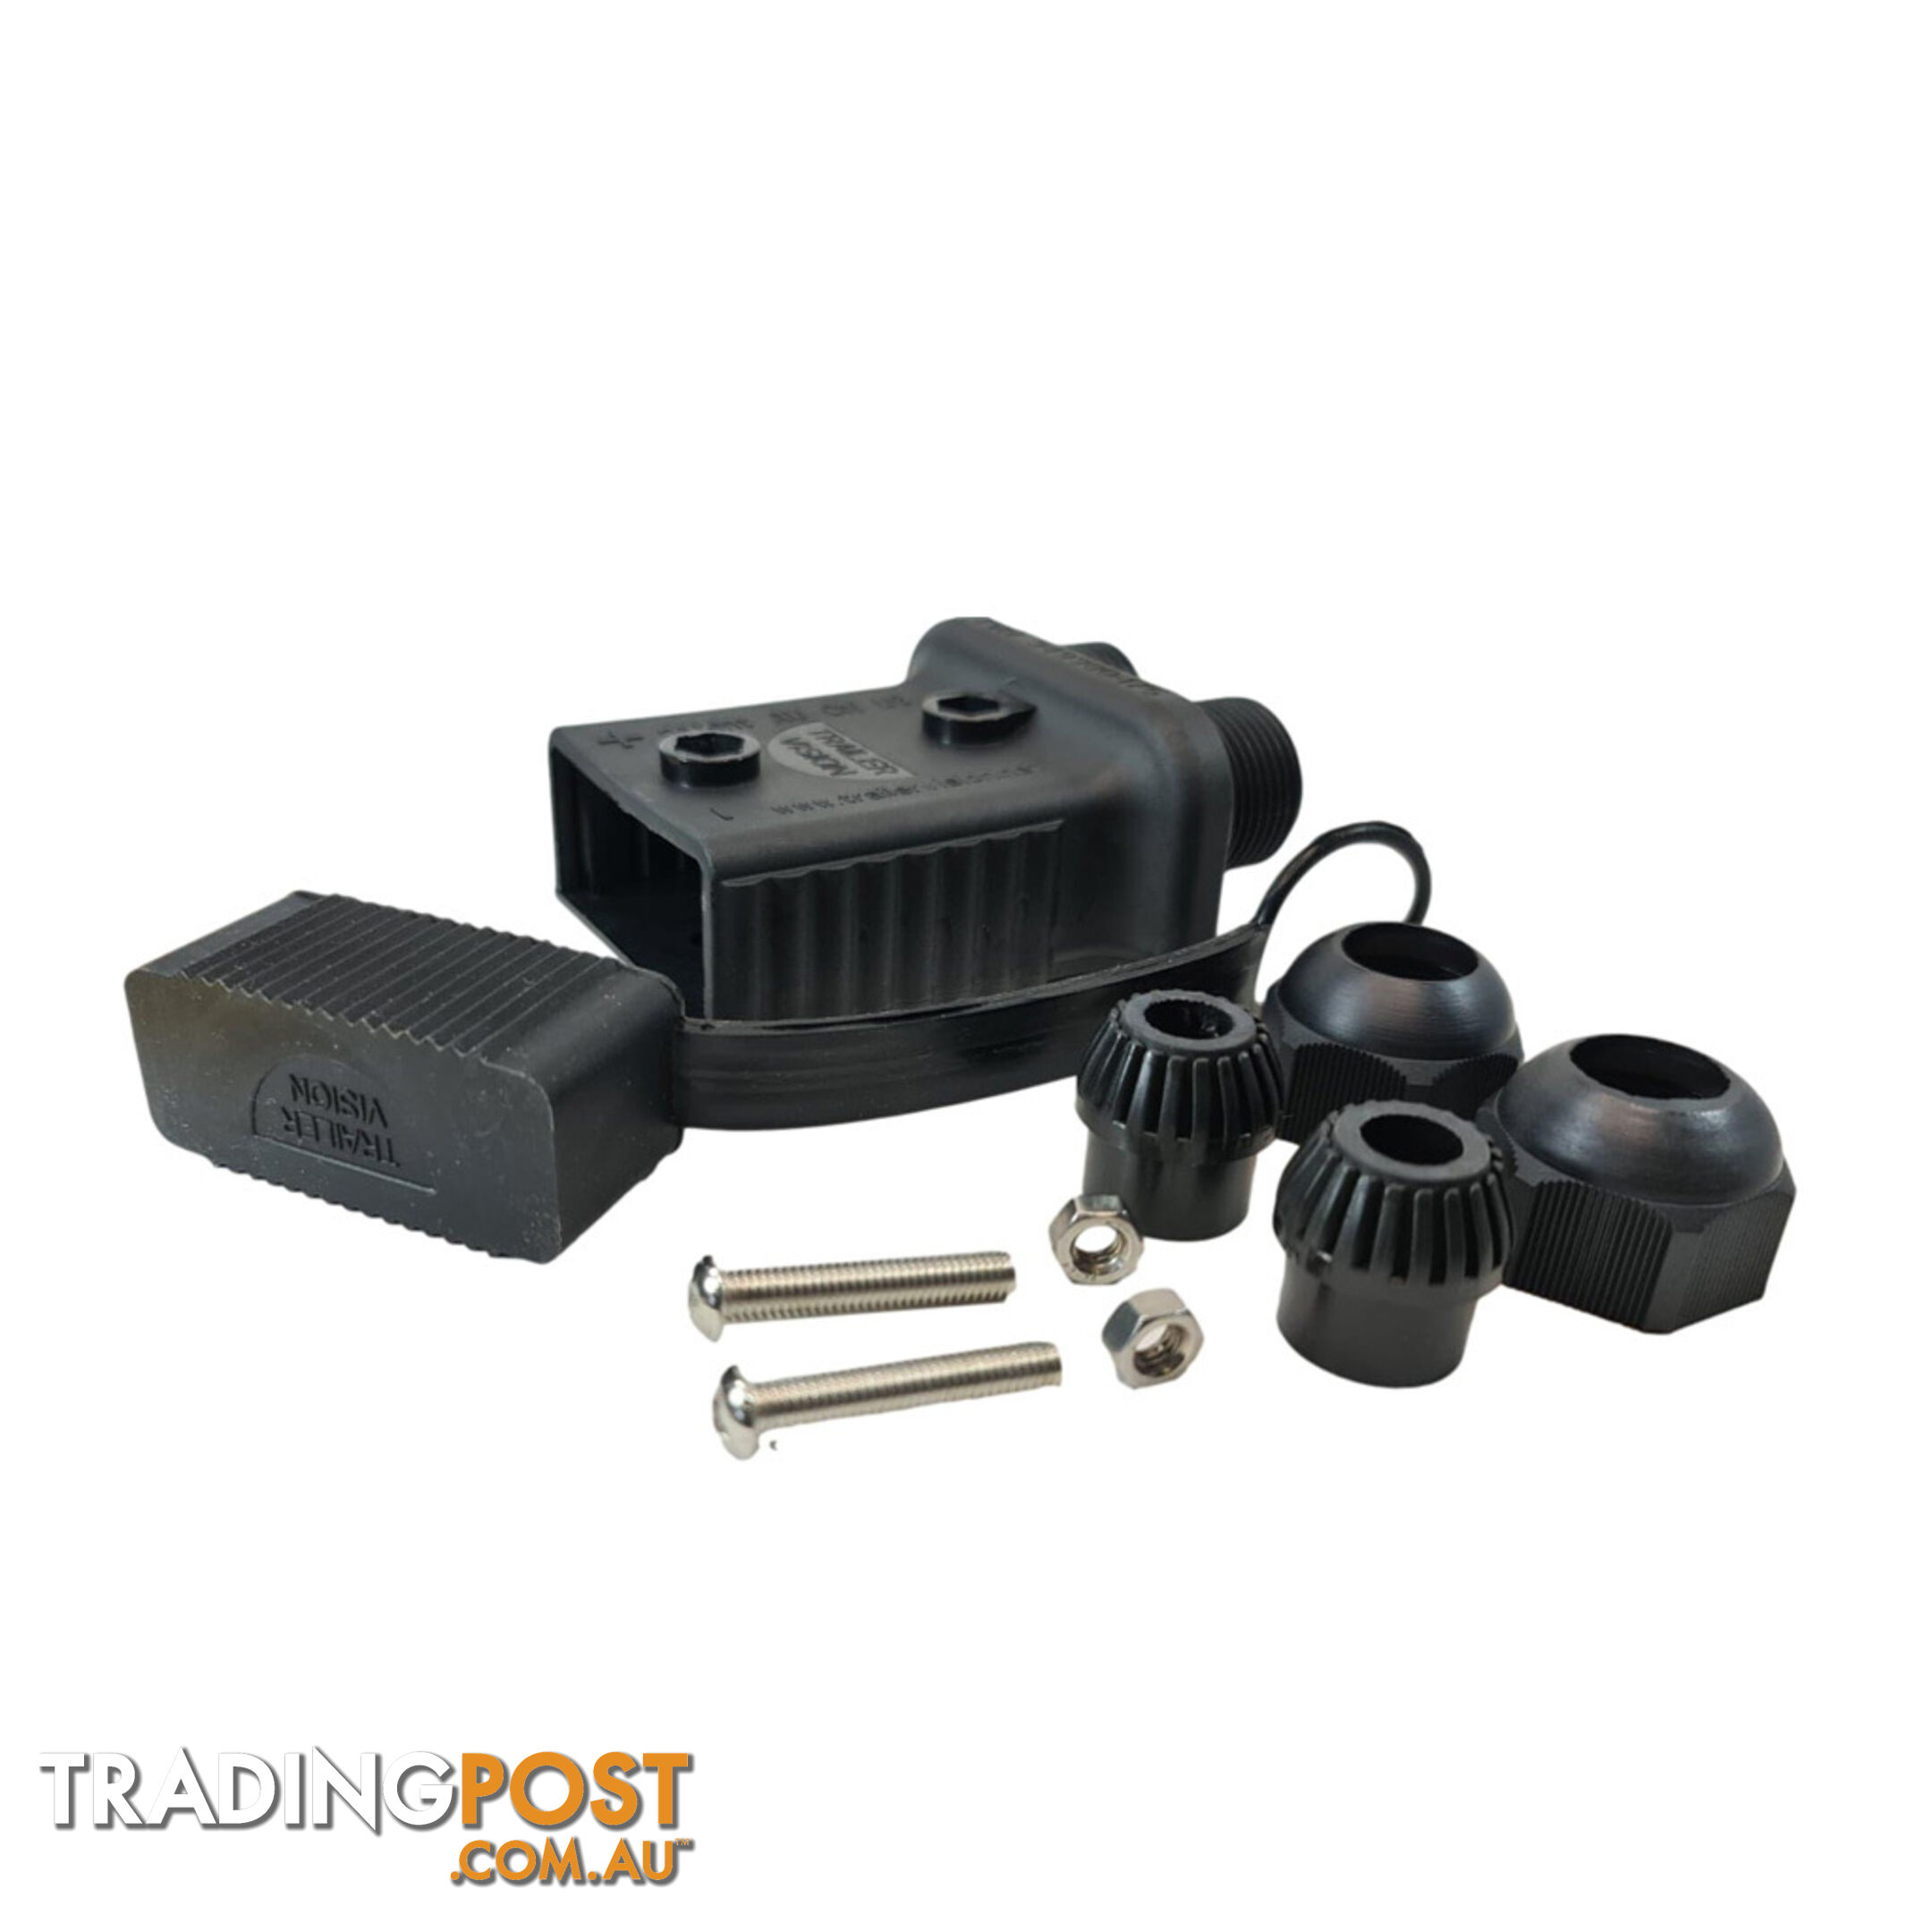 Trailer Vision 175 amp Anderson Plug Cover Assembly with LED Power Indicator SKU - TVN349380-175